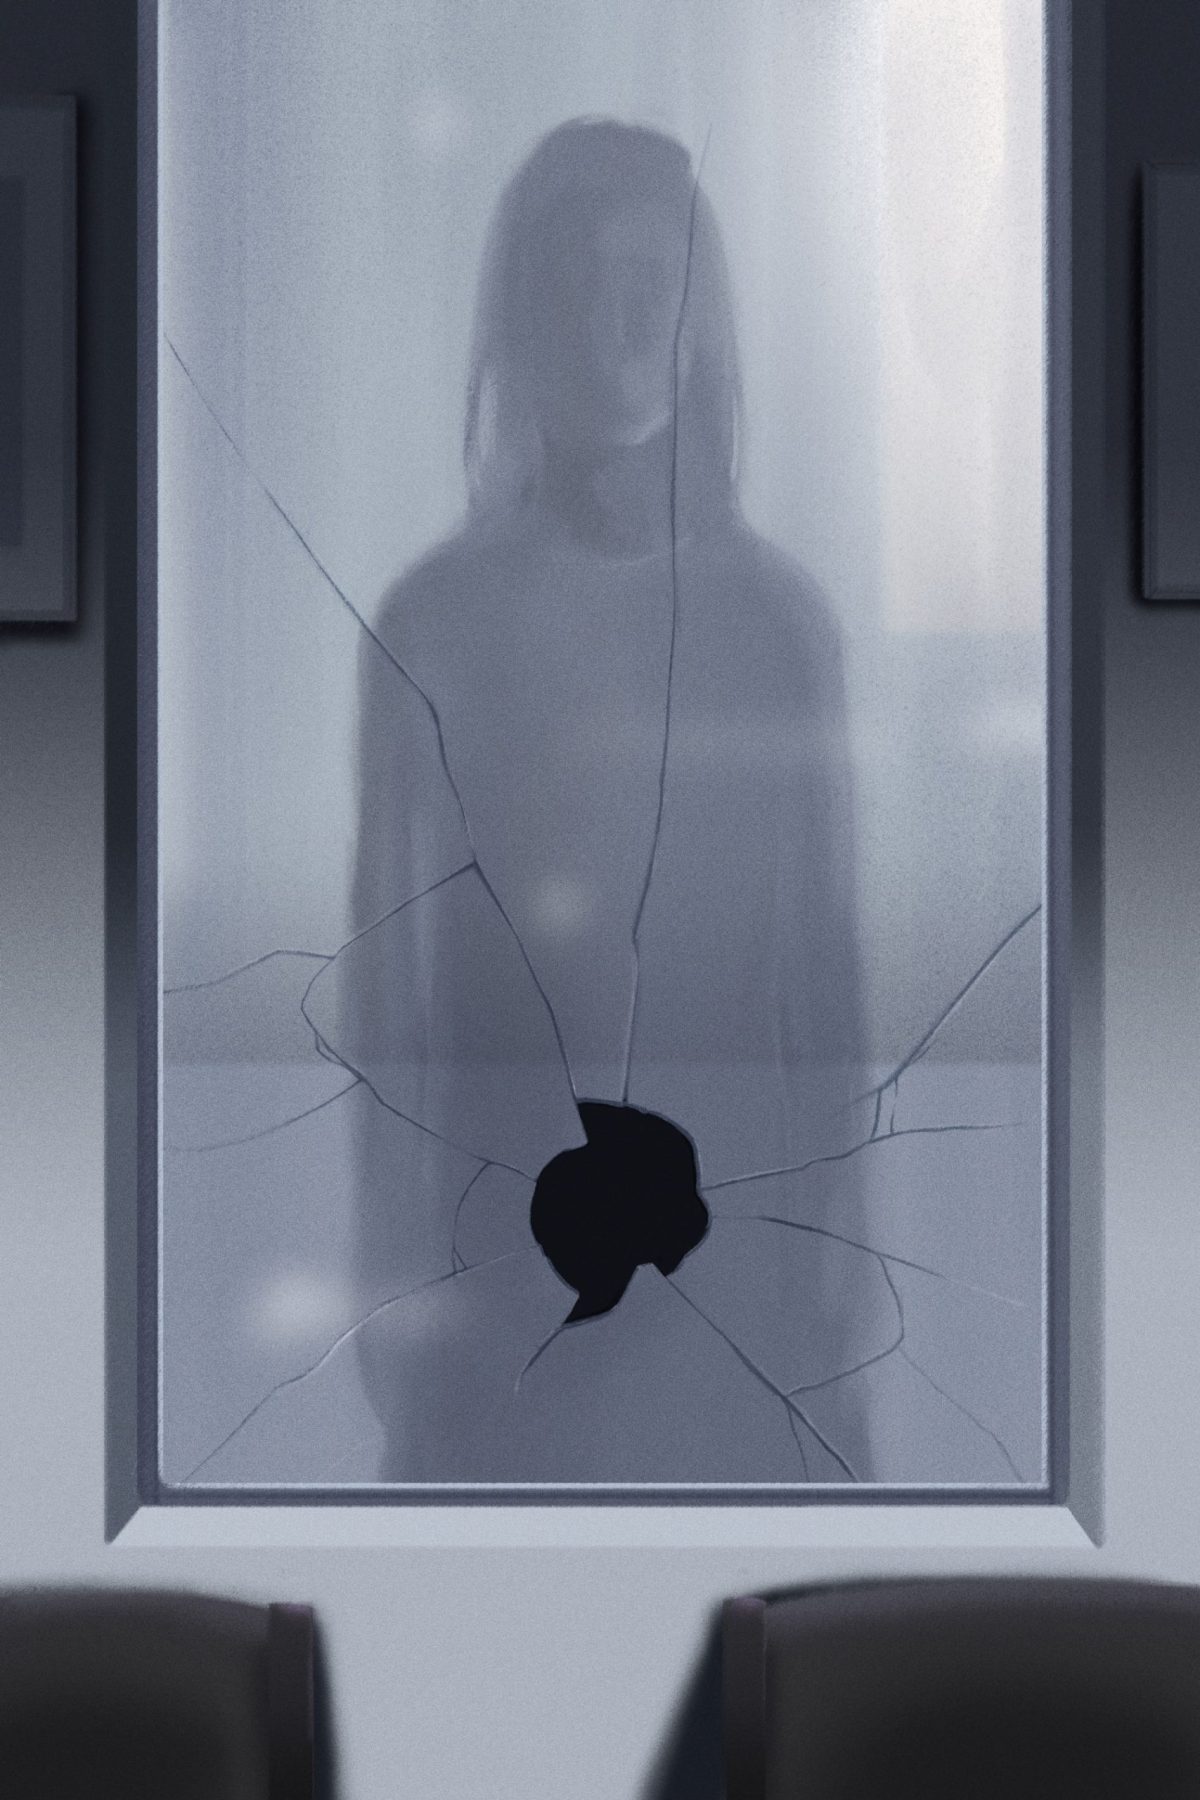 gray and moody illustration of a woman's silhouette behind a hazy broken window, with the glass broken at her abdomen and uterus area